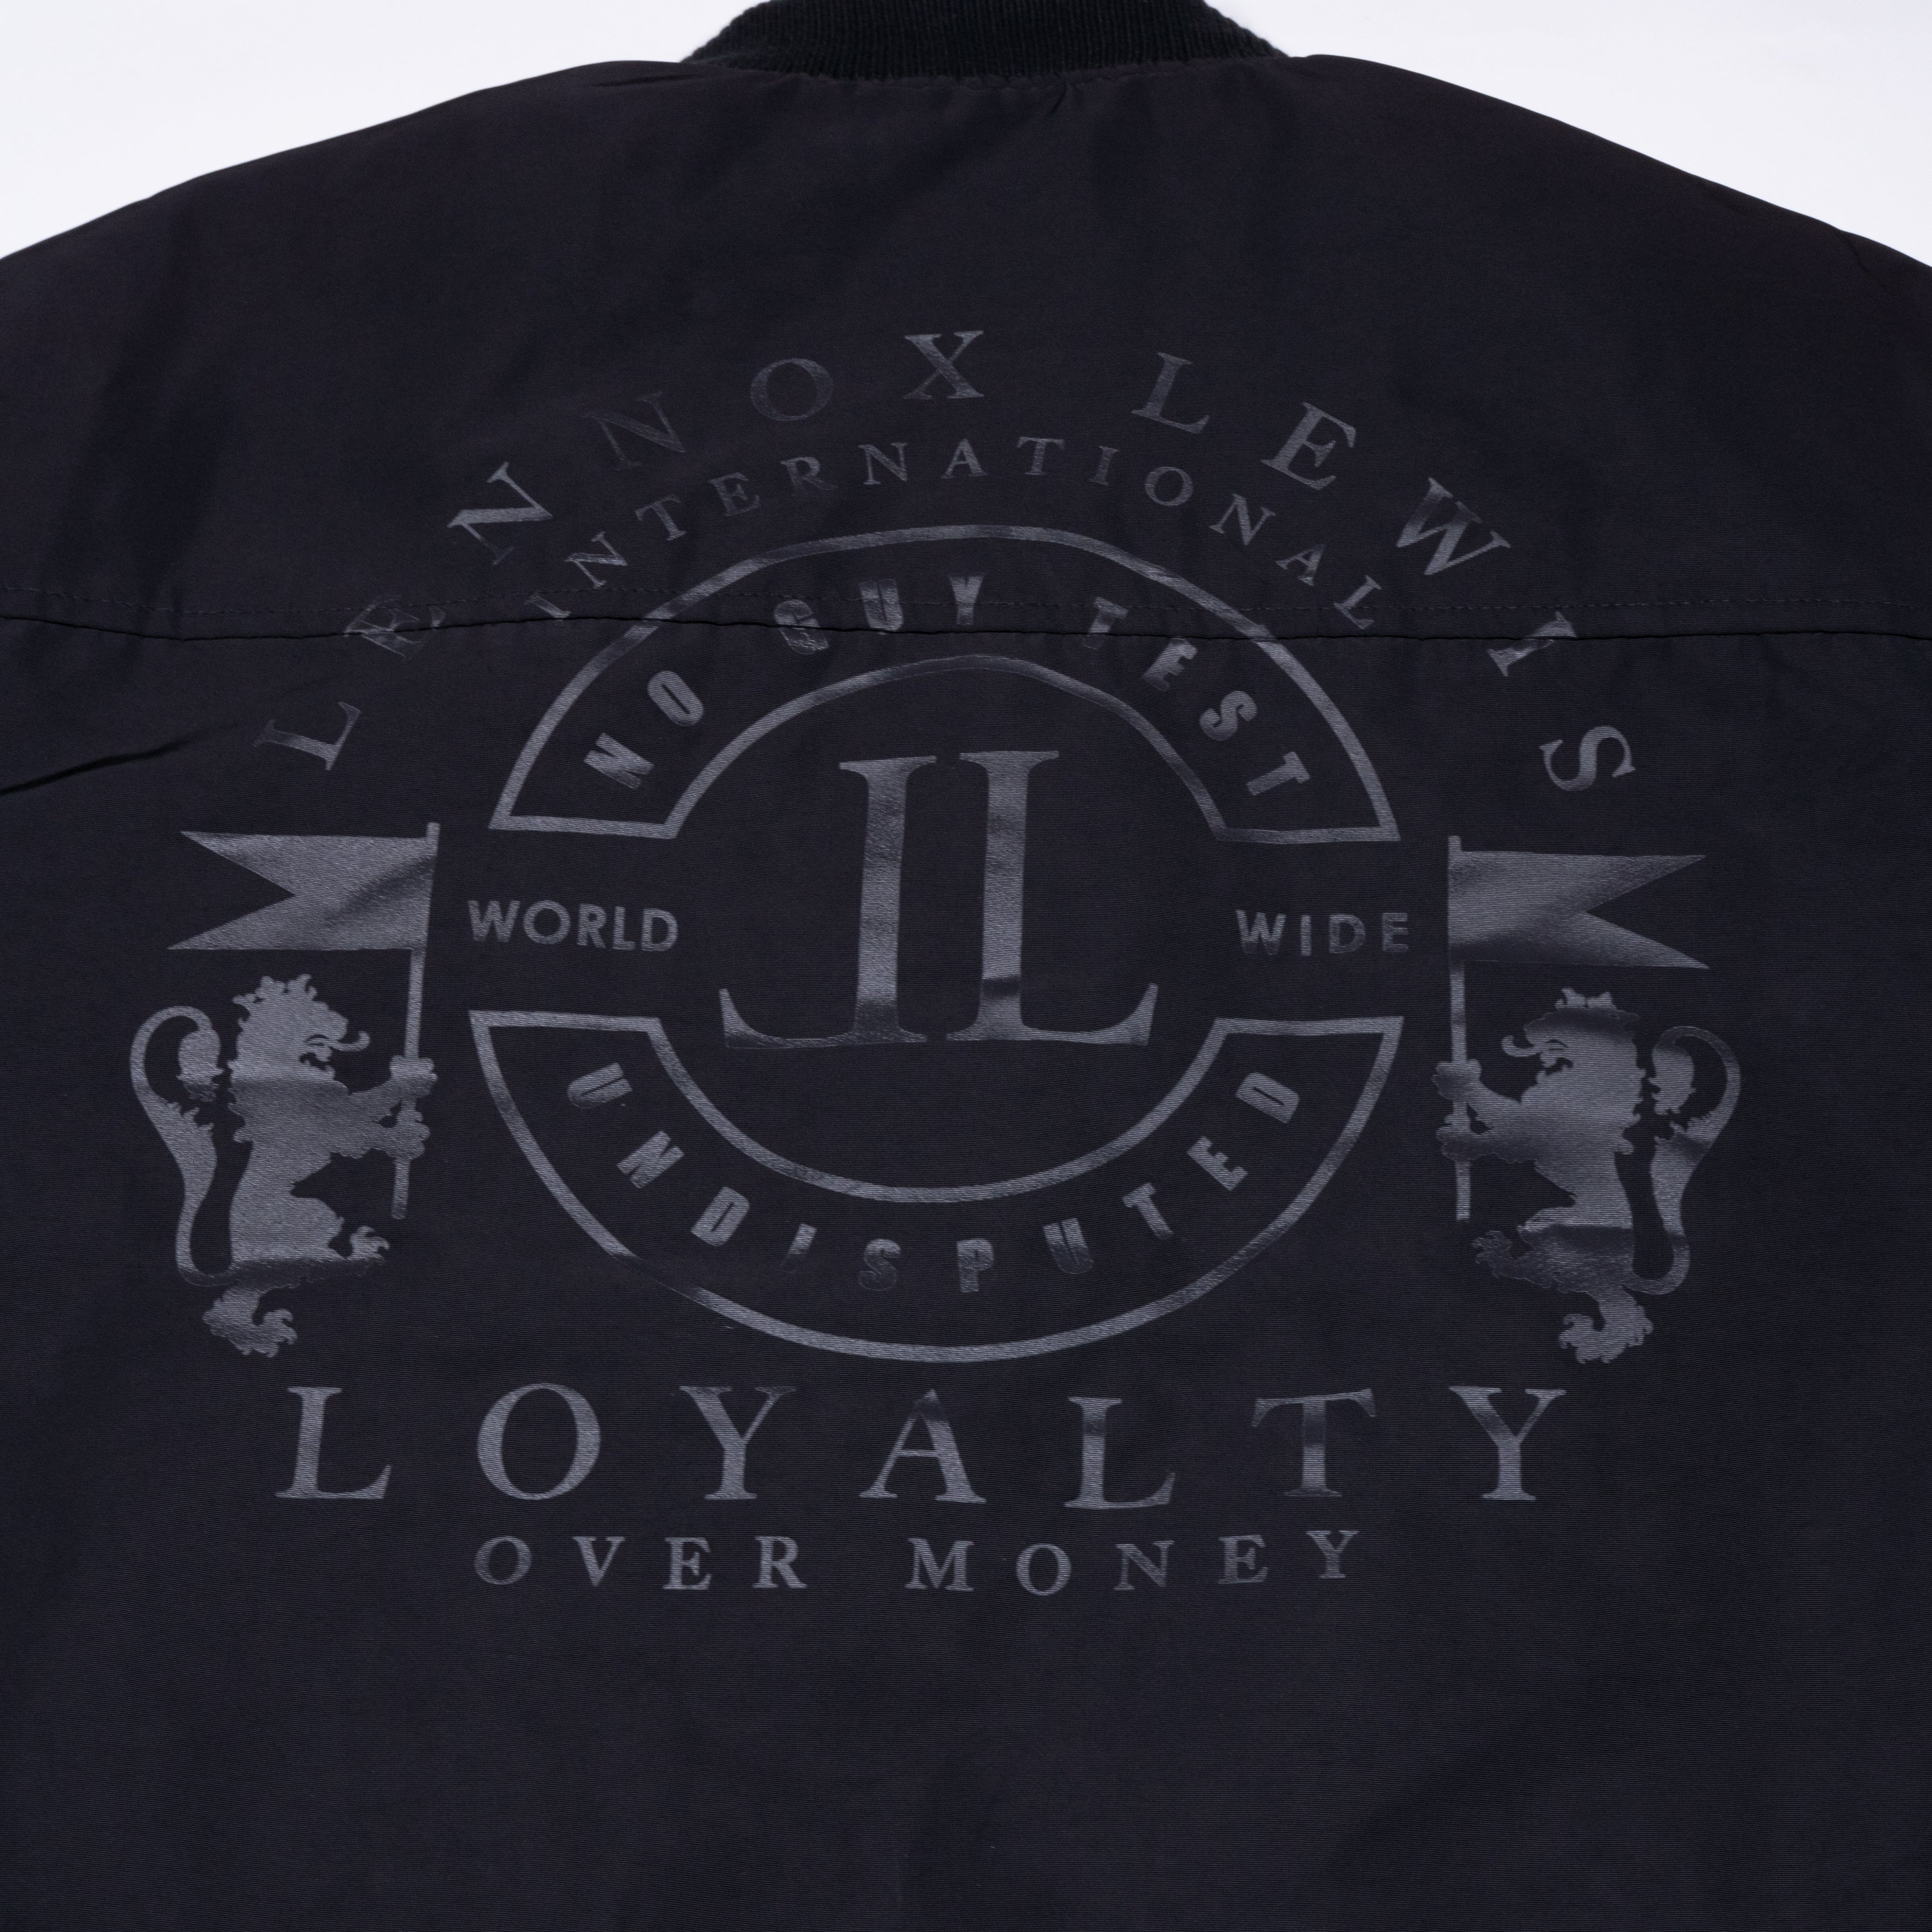 NO MAN TEST”BOMBER JACKET”limited edition